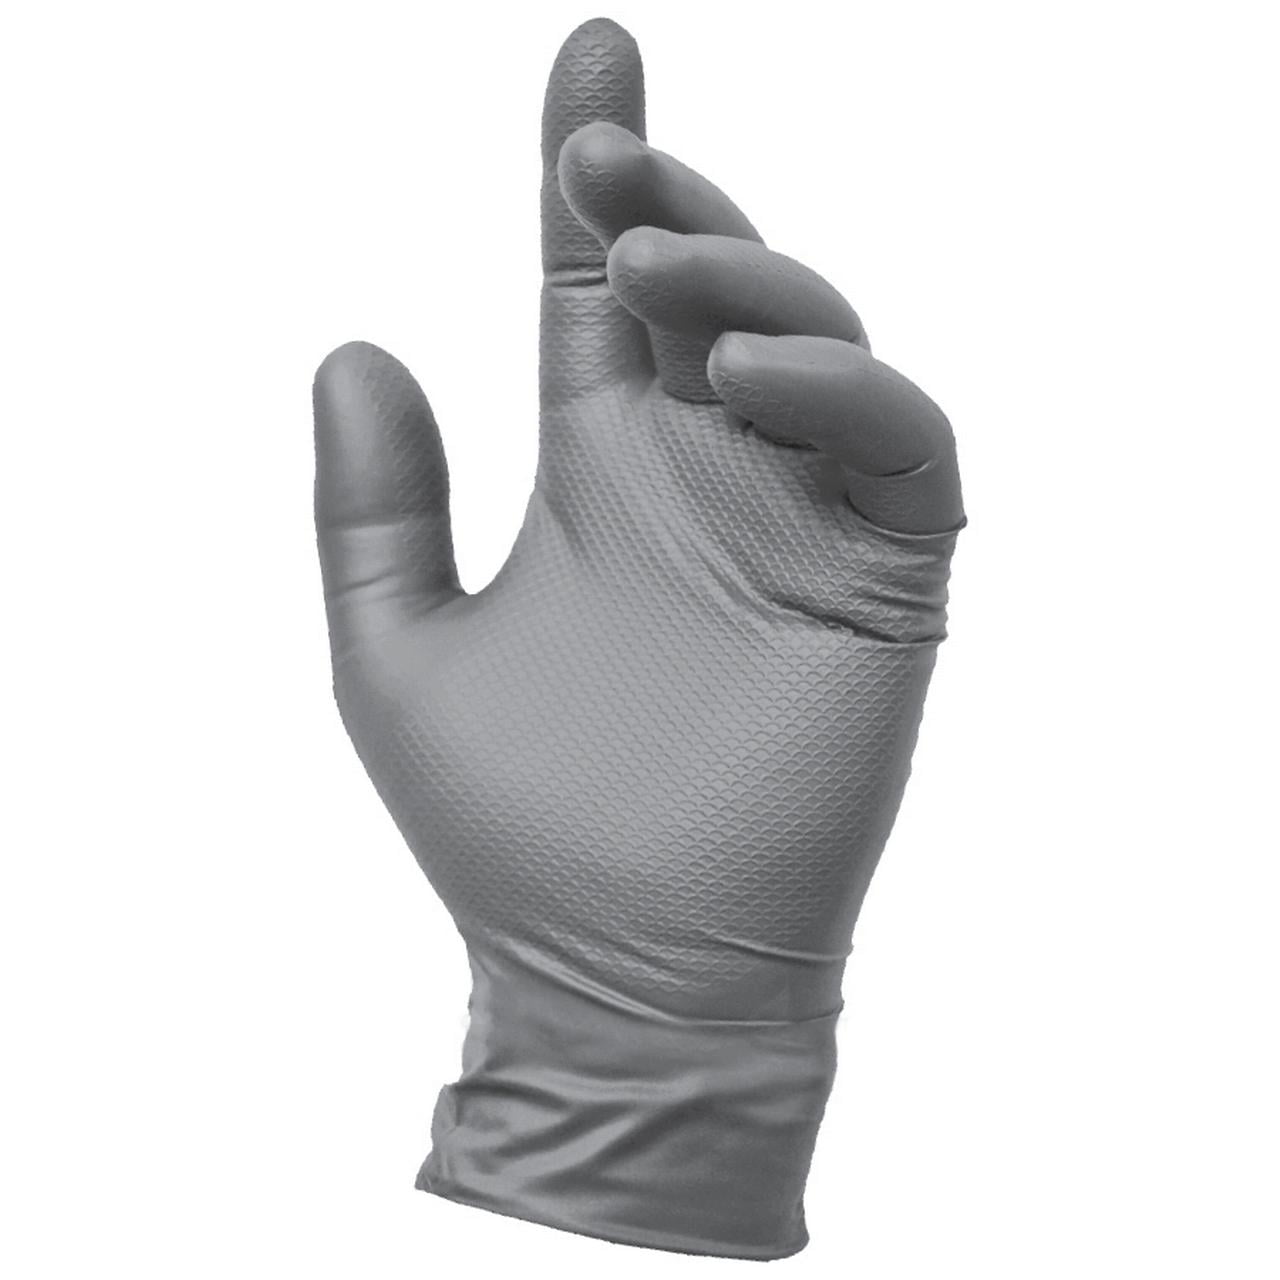 Grease Monkey 27537-14WM Nitrile Disposable Gloves, Heavy Duty, 6mil Thickness, Men's Large (50 count)